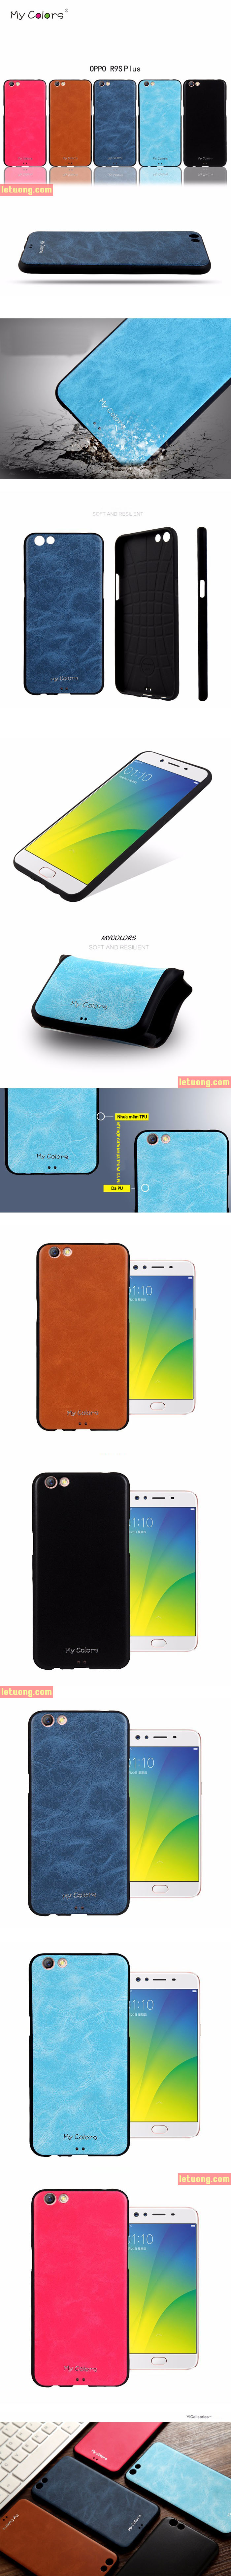 op-lung-oppo-f3-plus-mycolors-tpu-leather-lung-da-sang-trong-14.jpg